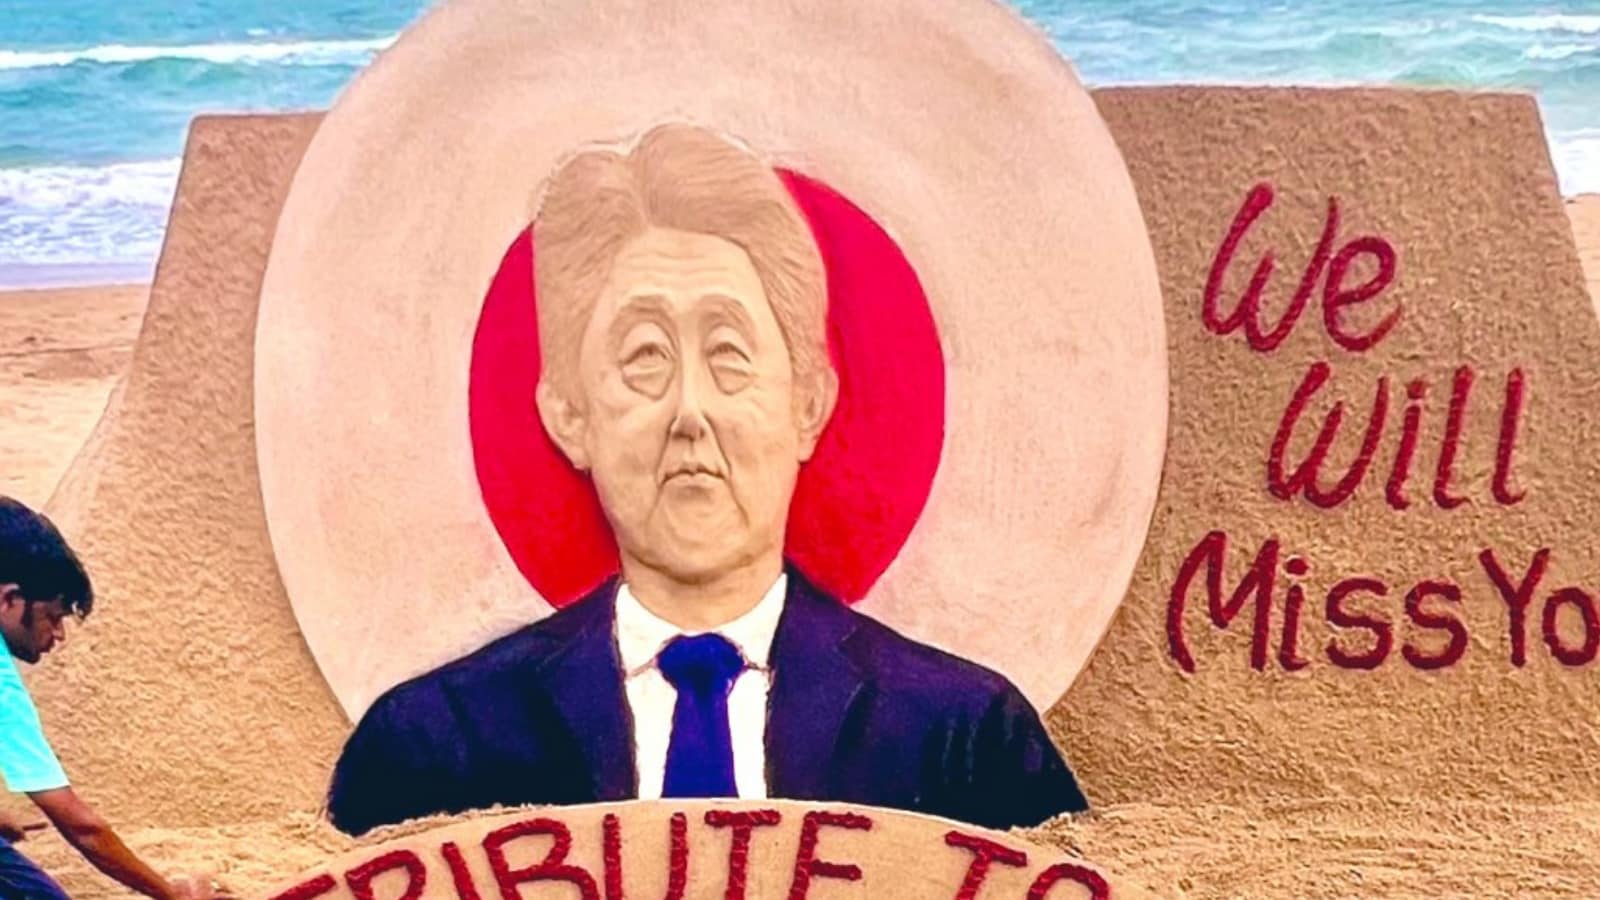 We Will Miss You': Sand Artist Pays Tribute to Late Shinzo Abe at Puri Beach